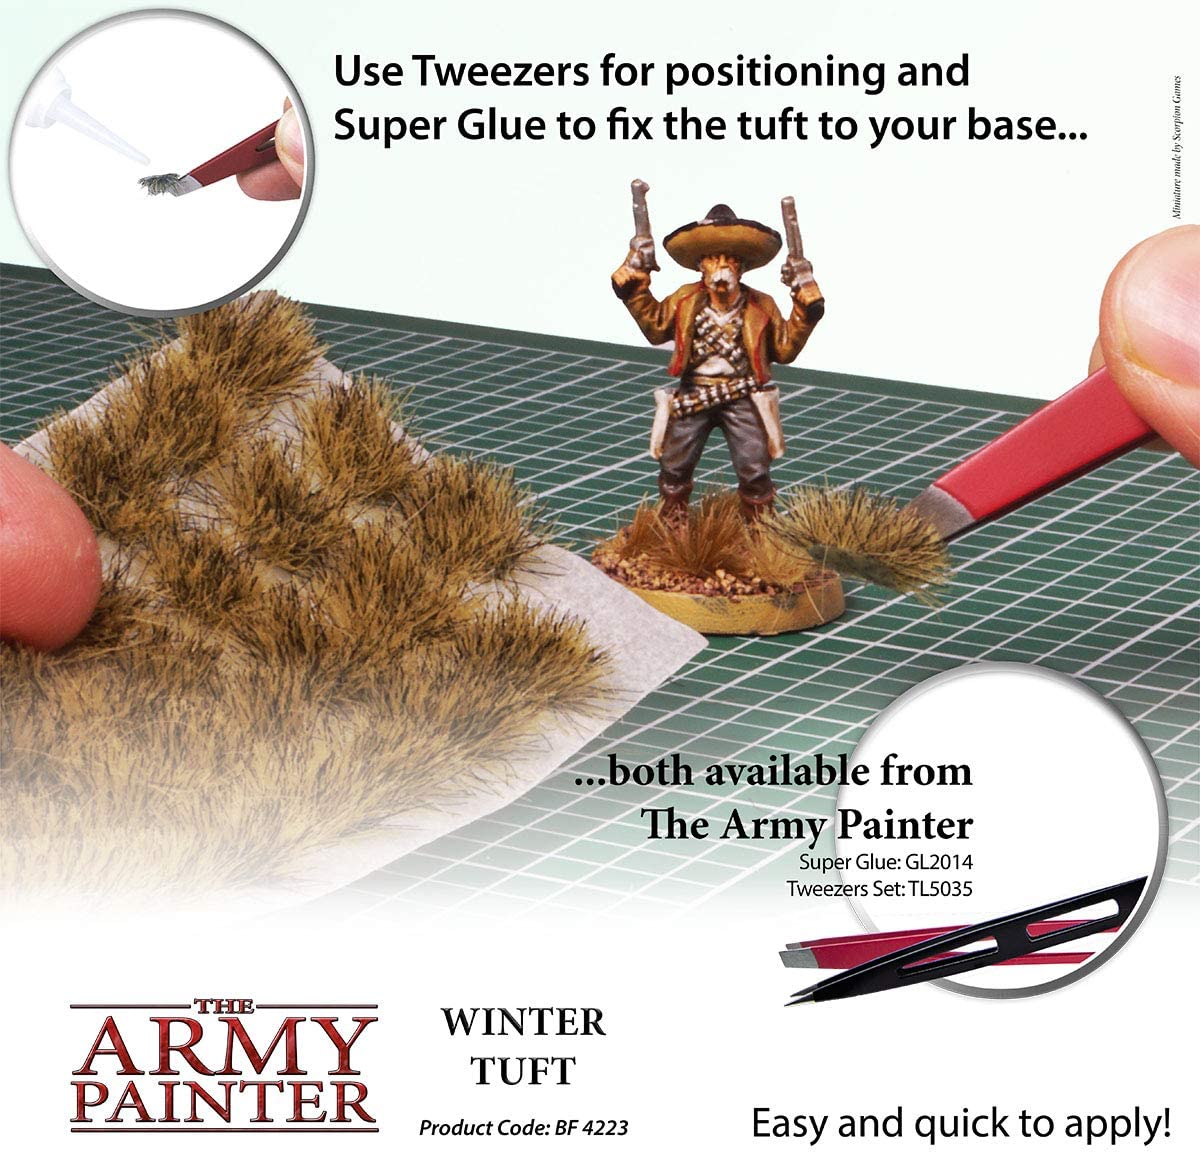 The Army Painter - Winter Tufts